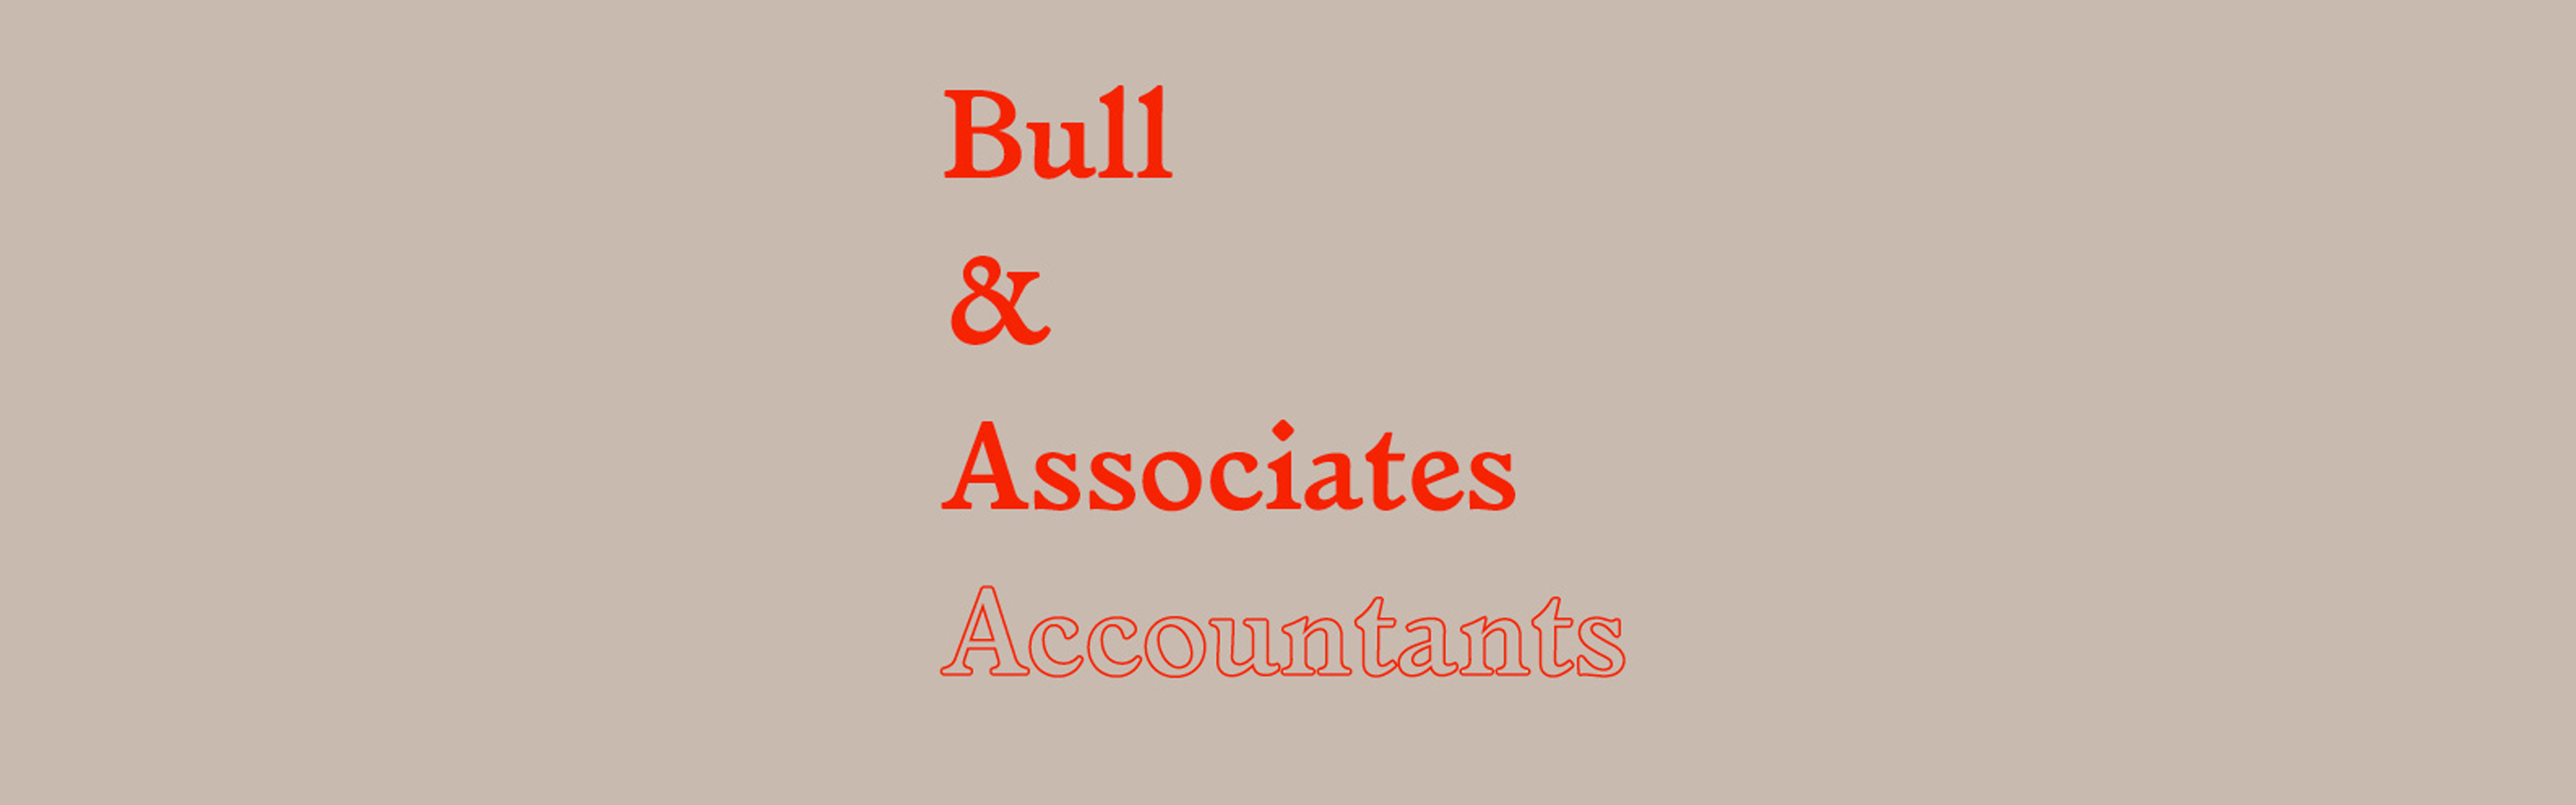 Bull-and-Associates-Accountants-banner.png